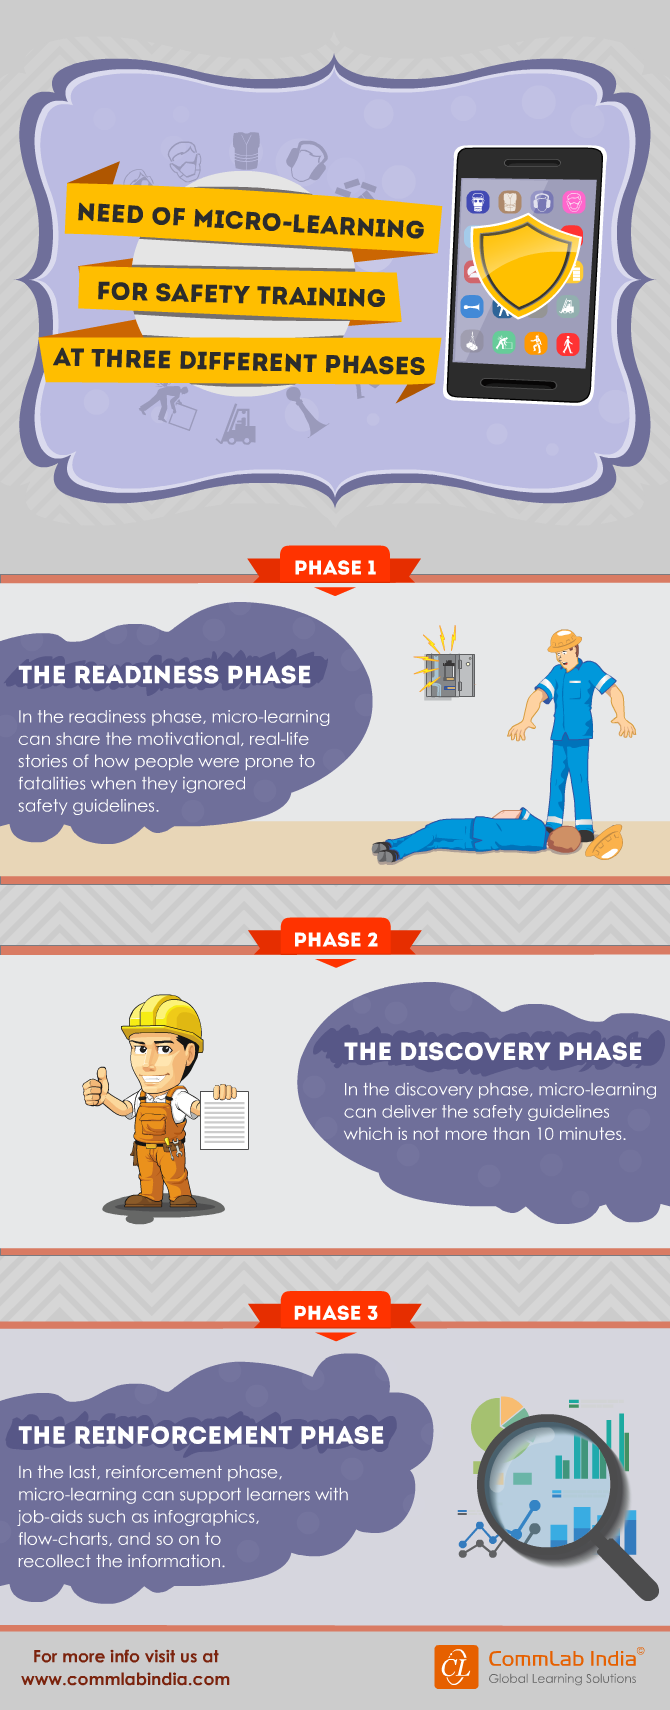 Microlearning for Safety Training in Three Different Phases [Infographic]